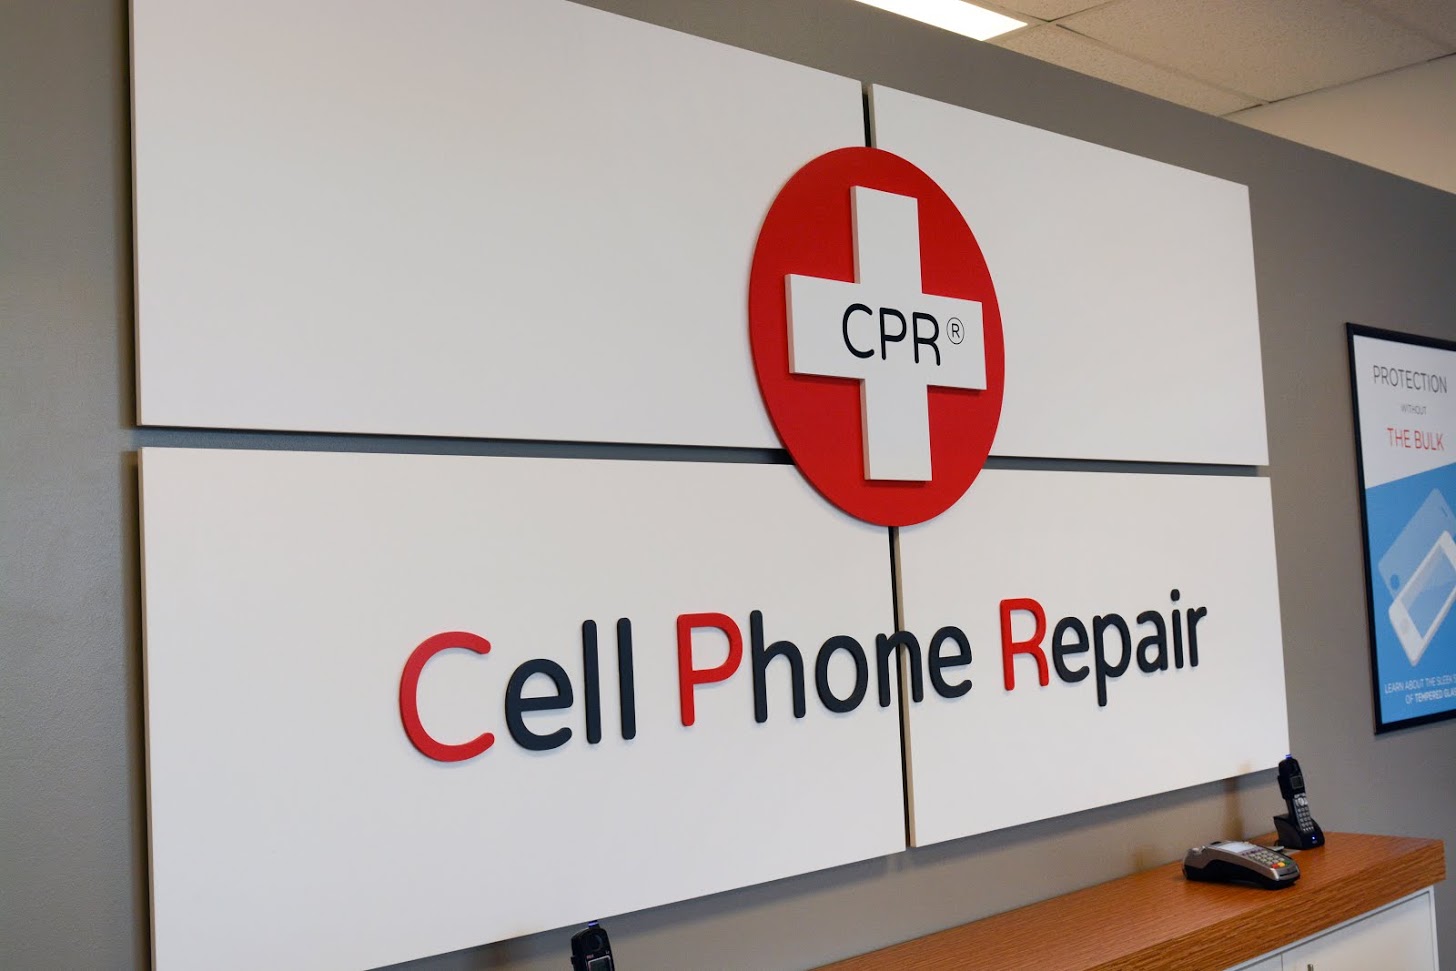 CPR Cell Phone Repair, Monday, February 24, 2020, Press release picture